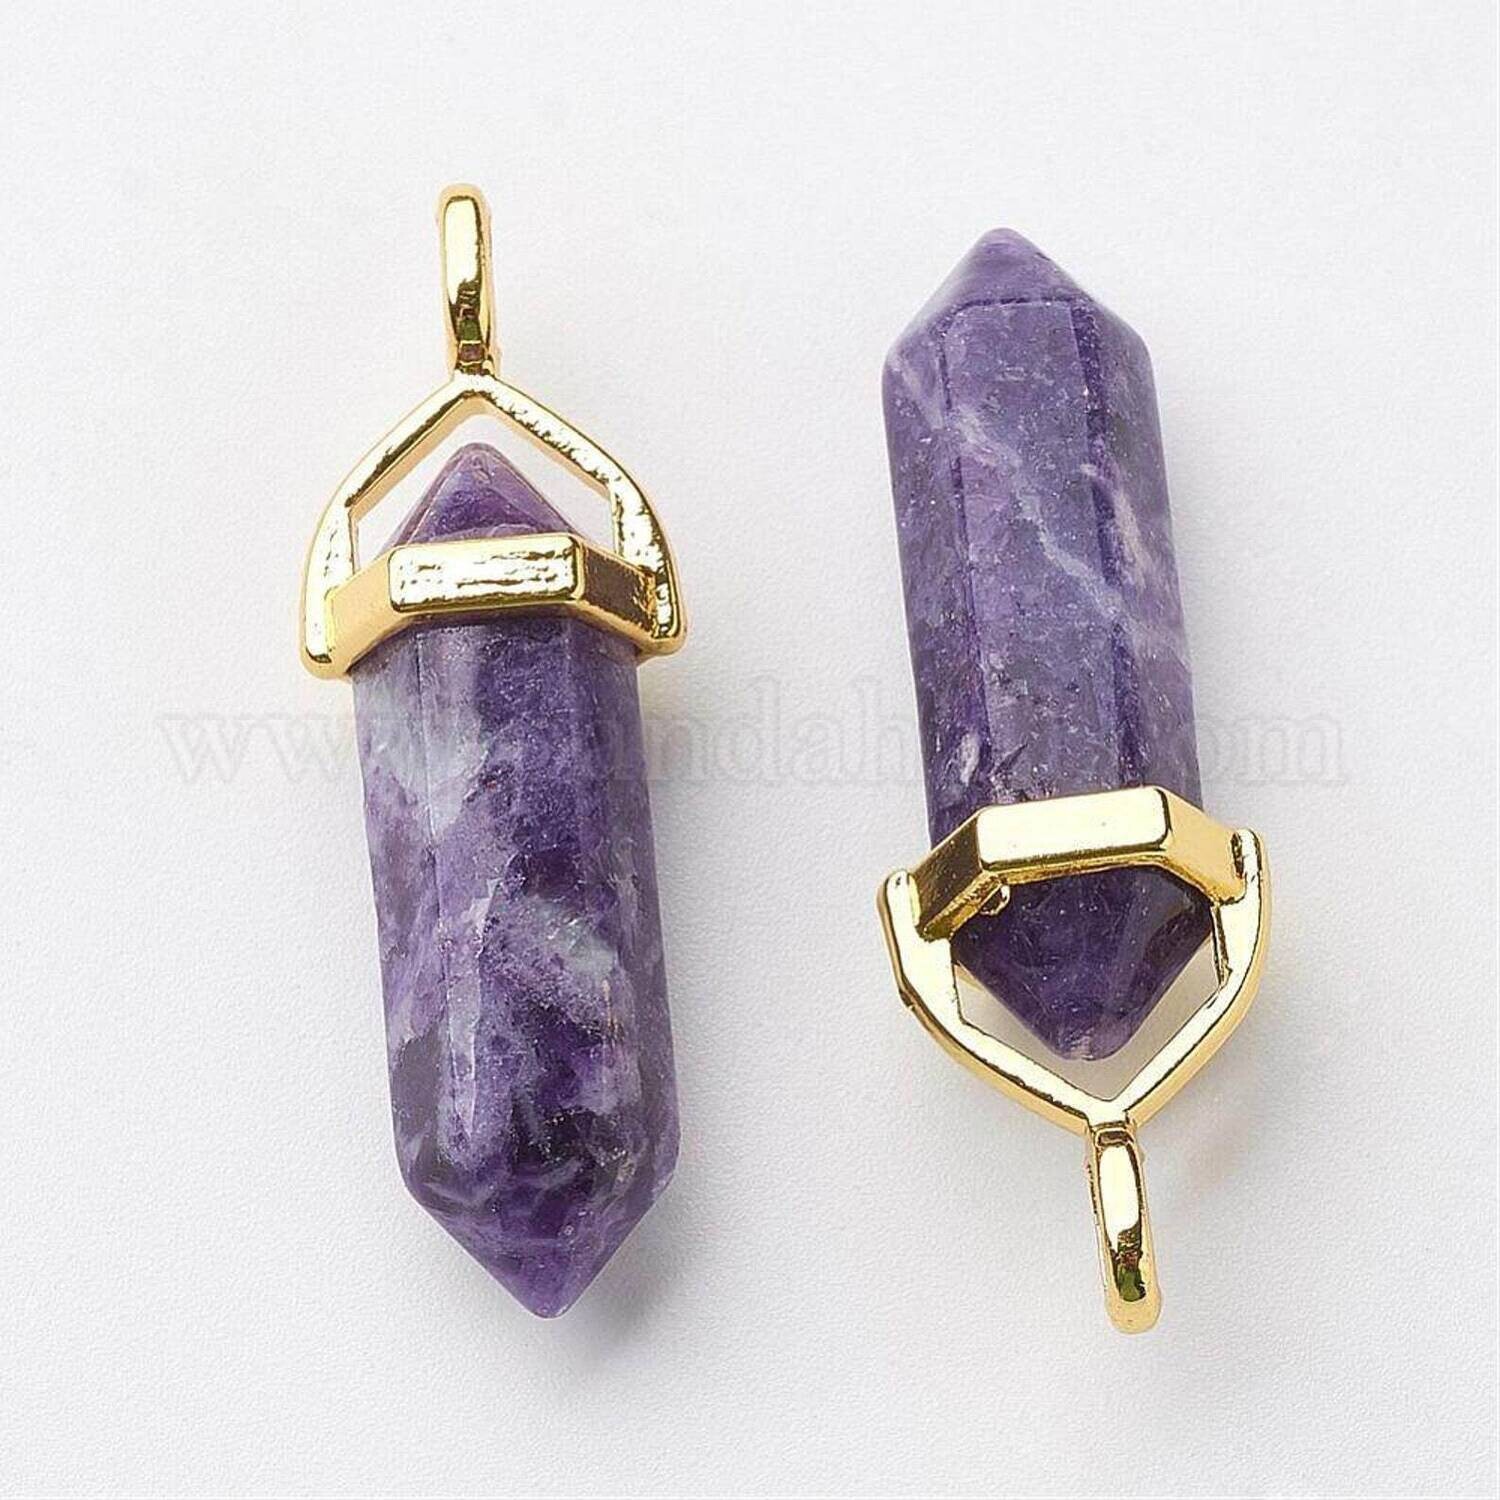 Two Charoite Crystal Double Terminated Pendants Spiritual Healing Priority Higher Purpose Priority Tracked Shipping